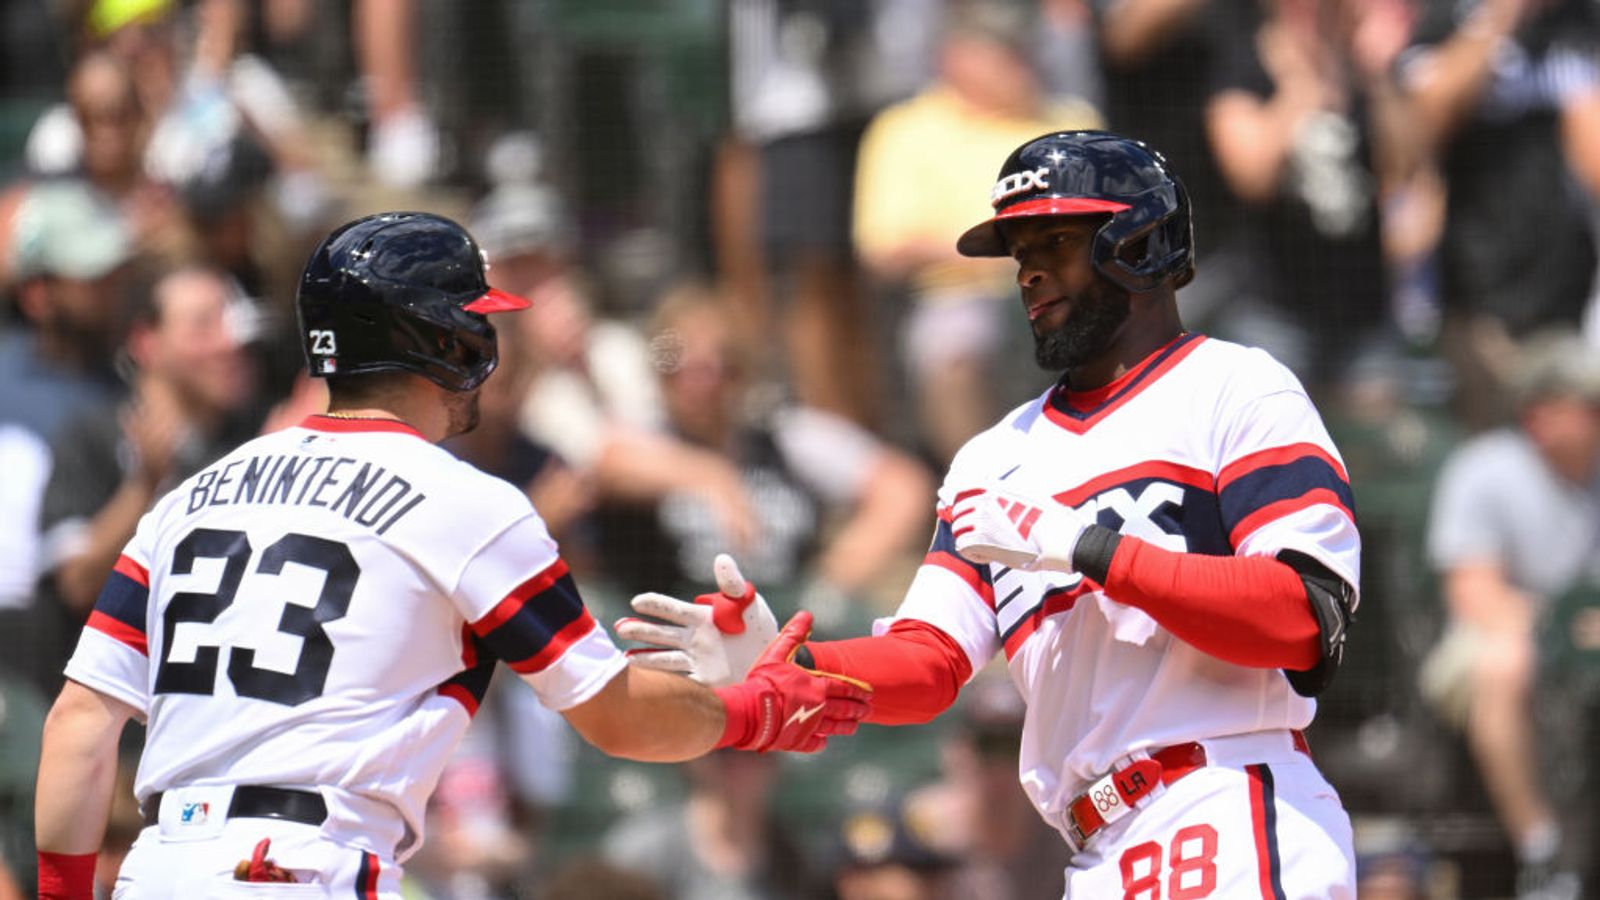 BSJ Game Report: White Sox 4, Red Sox 1 - Uninspired Sox offense muster one  run, Luis Robert Jr. homers twice, fall to 3-4 on road trip